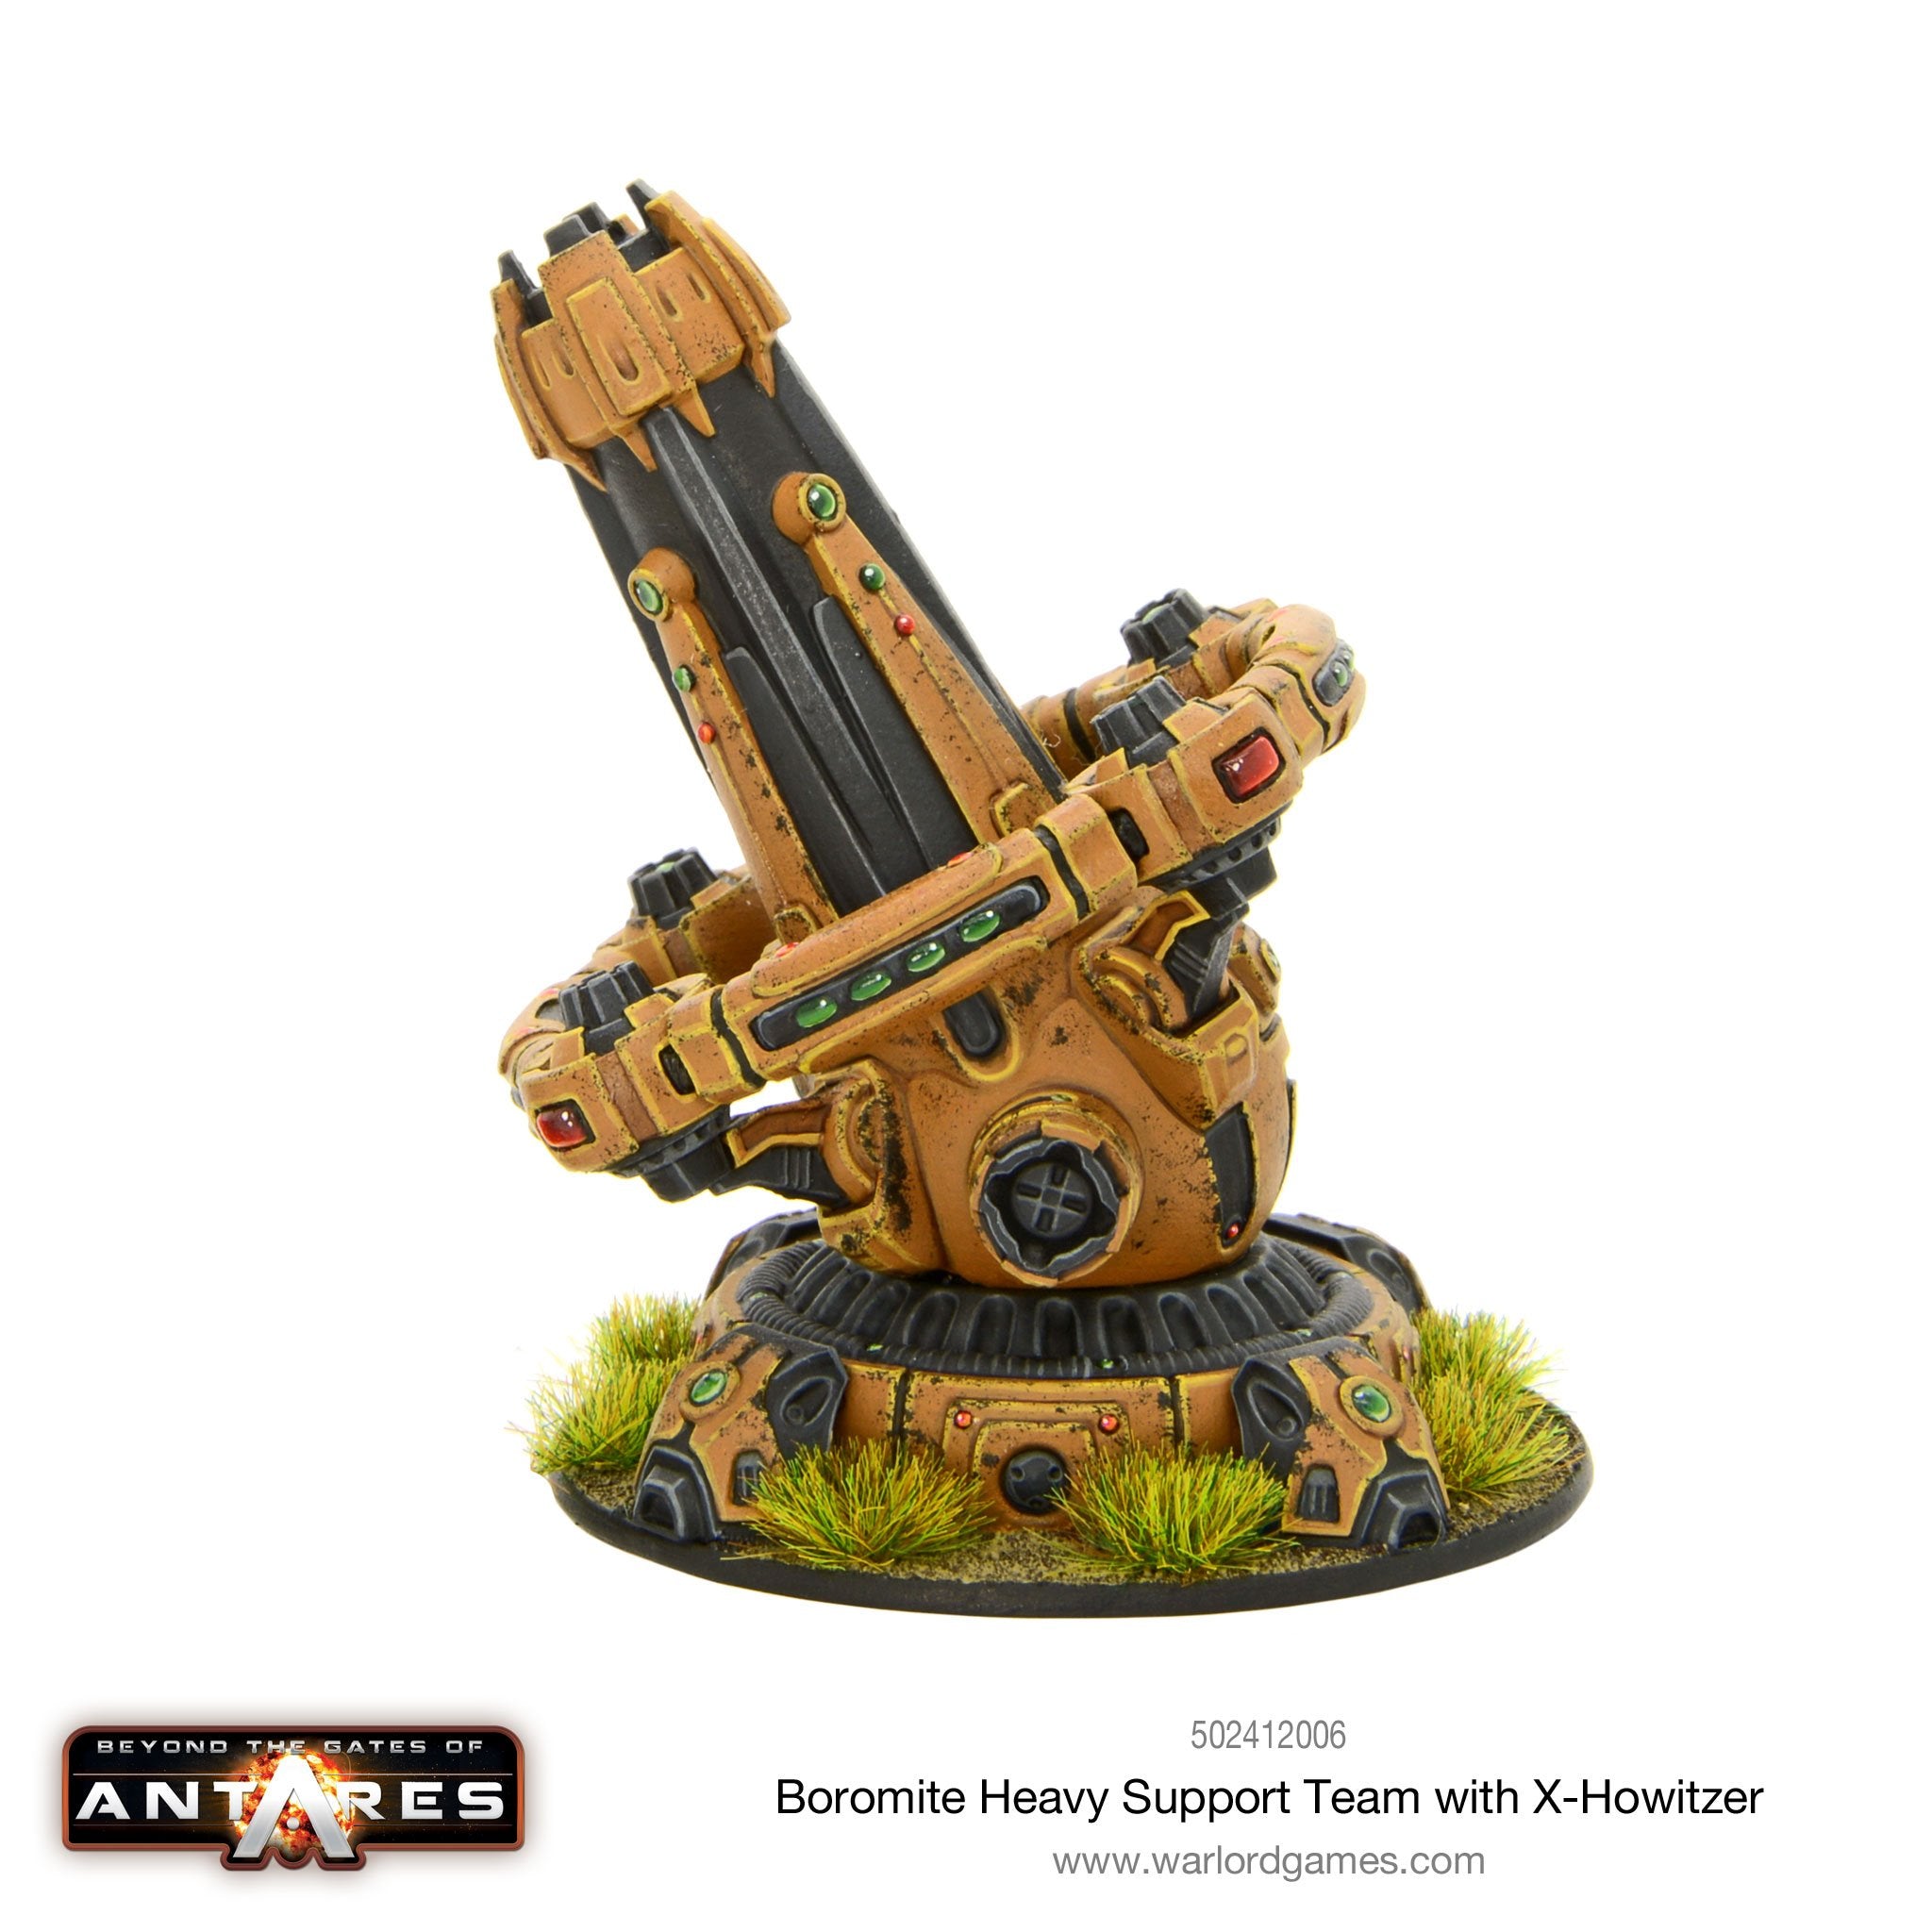 Boromite heavy support team with X-Howitzer